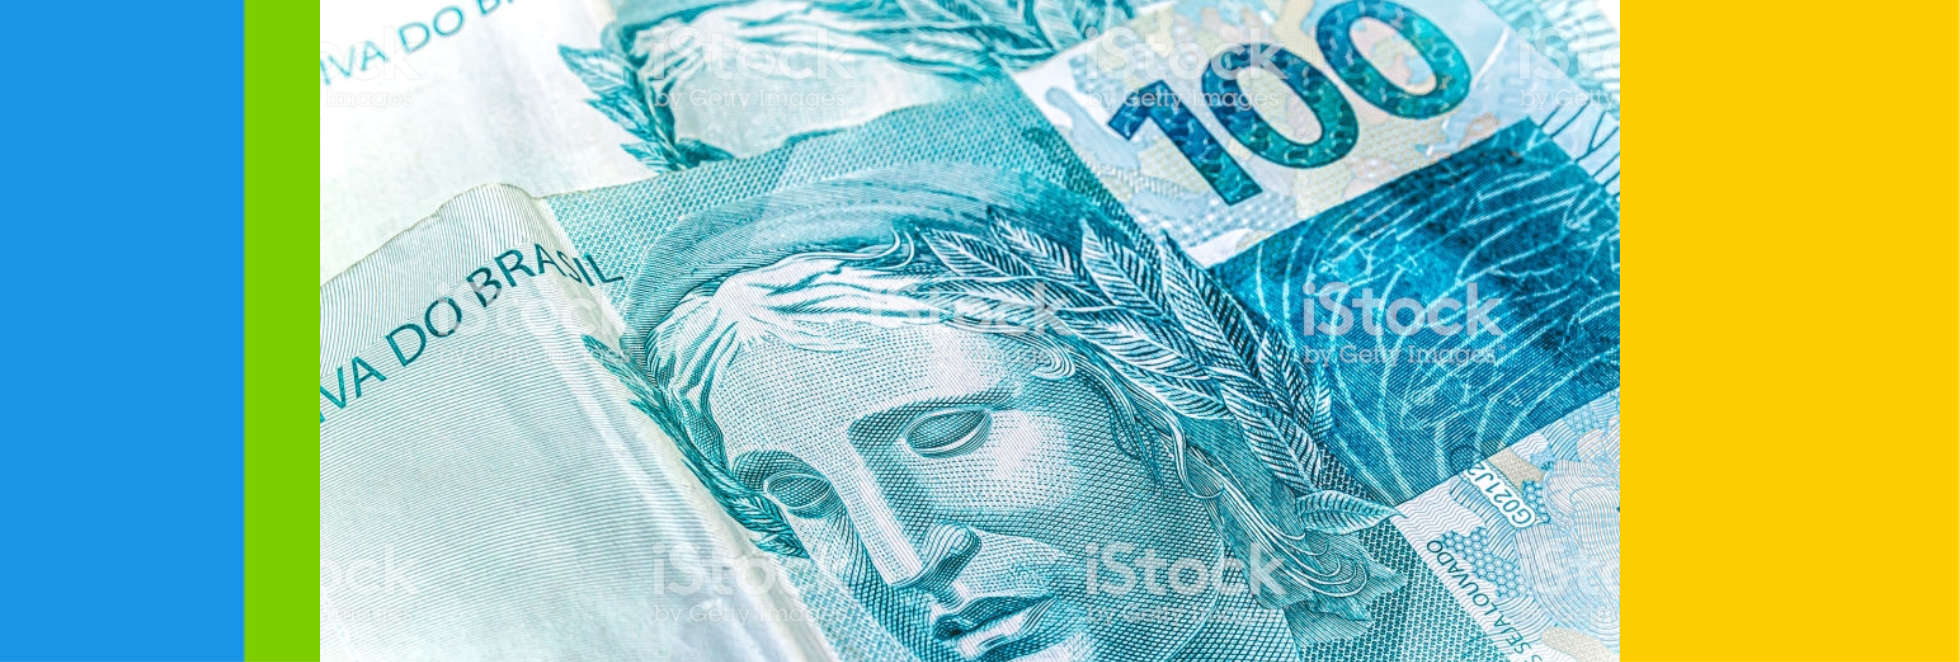 Brazilian Real Brl And Us Dollar Usd Exchange Market Concept Money Exchange  Real Currency Us Dollar Brl Usd Stock Photo - Download Image Now - iStock